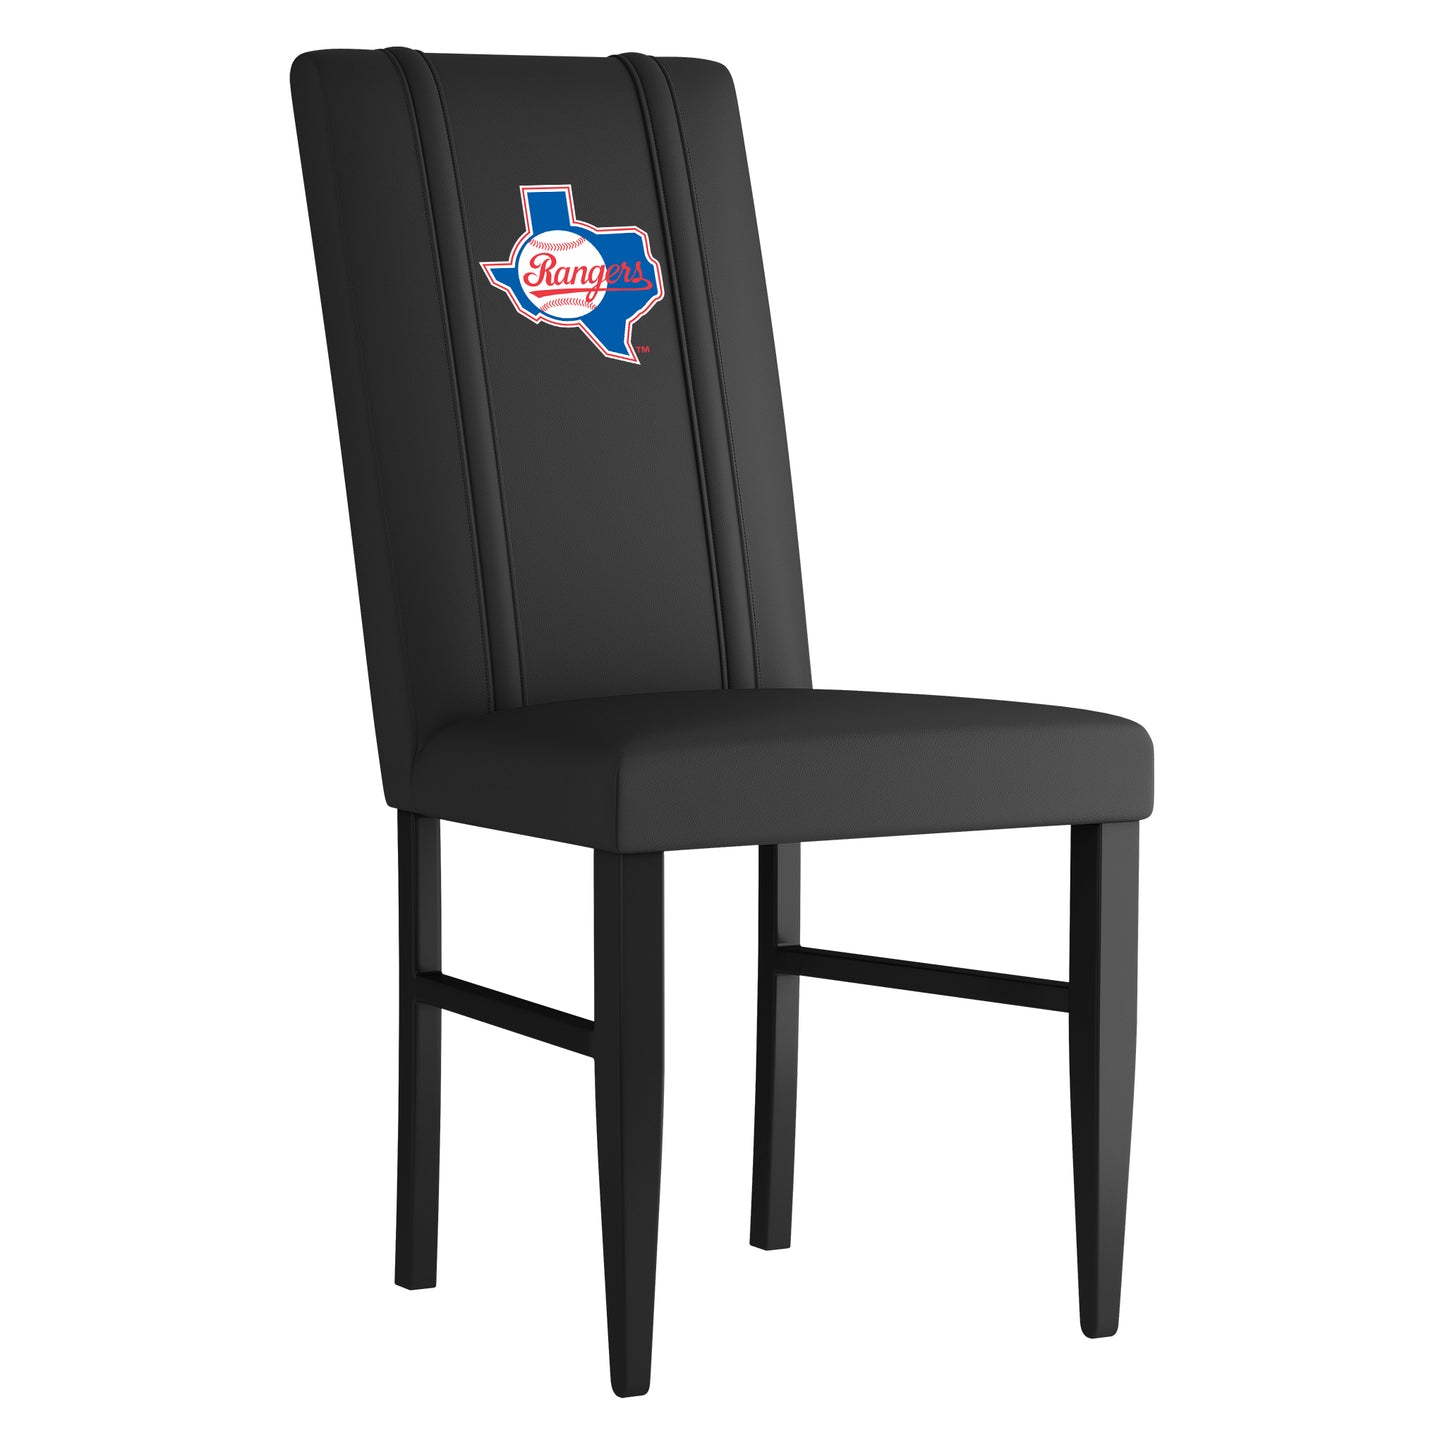 Side Chair 2000 with Texas Rangers Cooperstown Set of 2